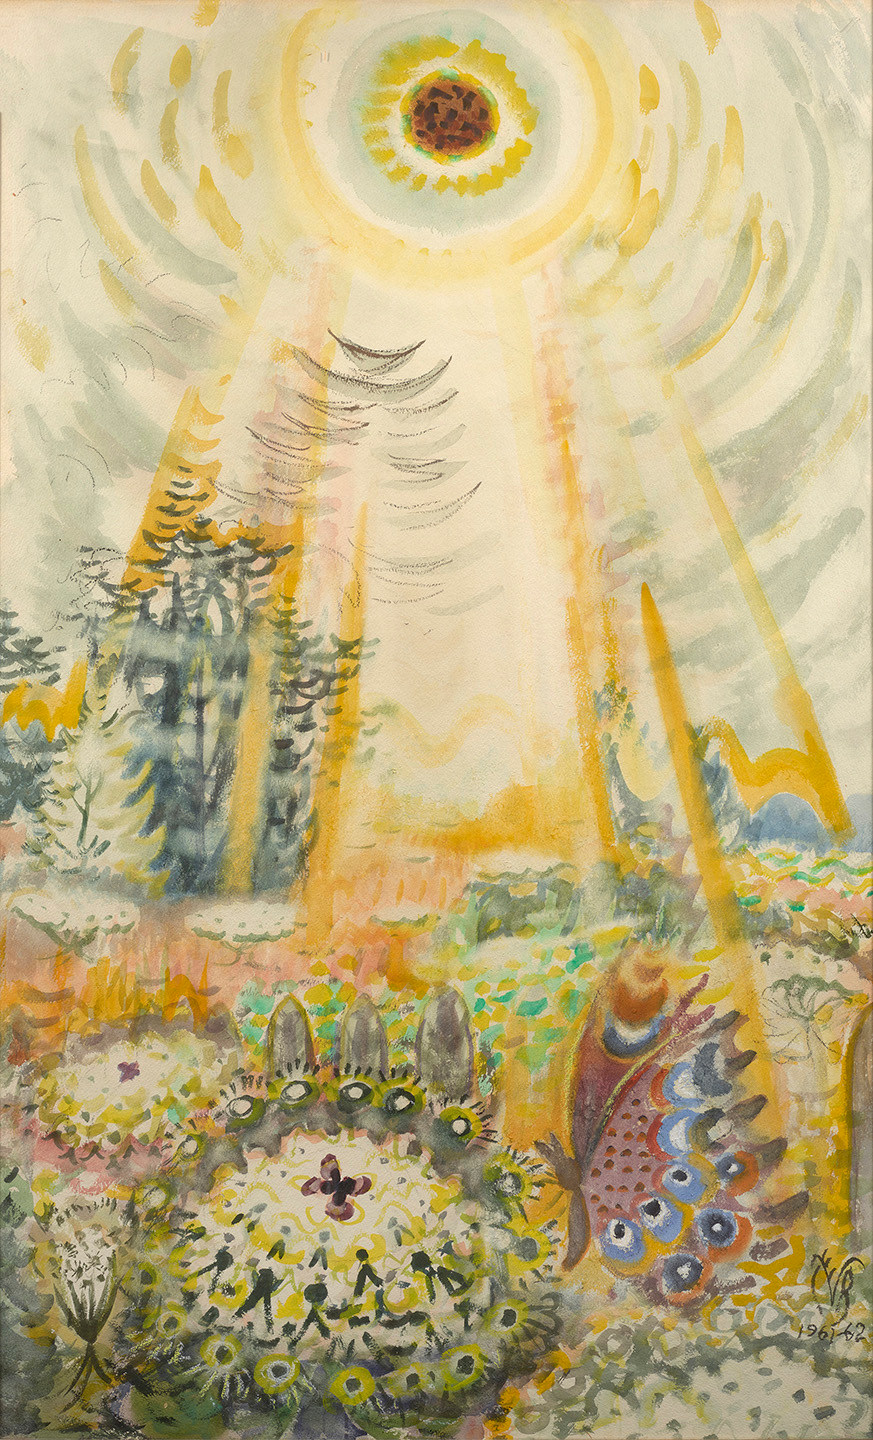 About the Artwork Charles Ephraim Burchfield (1893 1967)  the Sun and Queen Anne’s Lace, 1961 – 1962           Watercolor and Gouache on Pieced Paper Laid Down on Board  43 7:8 X 26 ¾ In.  by Charles Burchfield